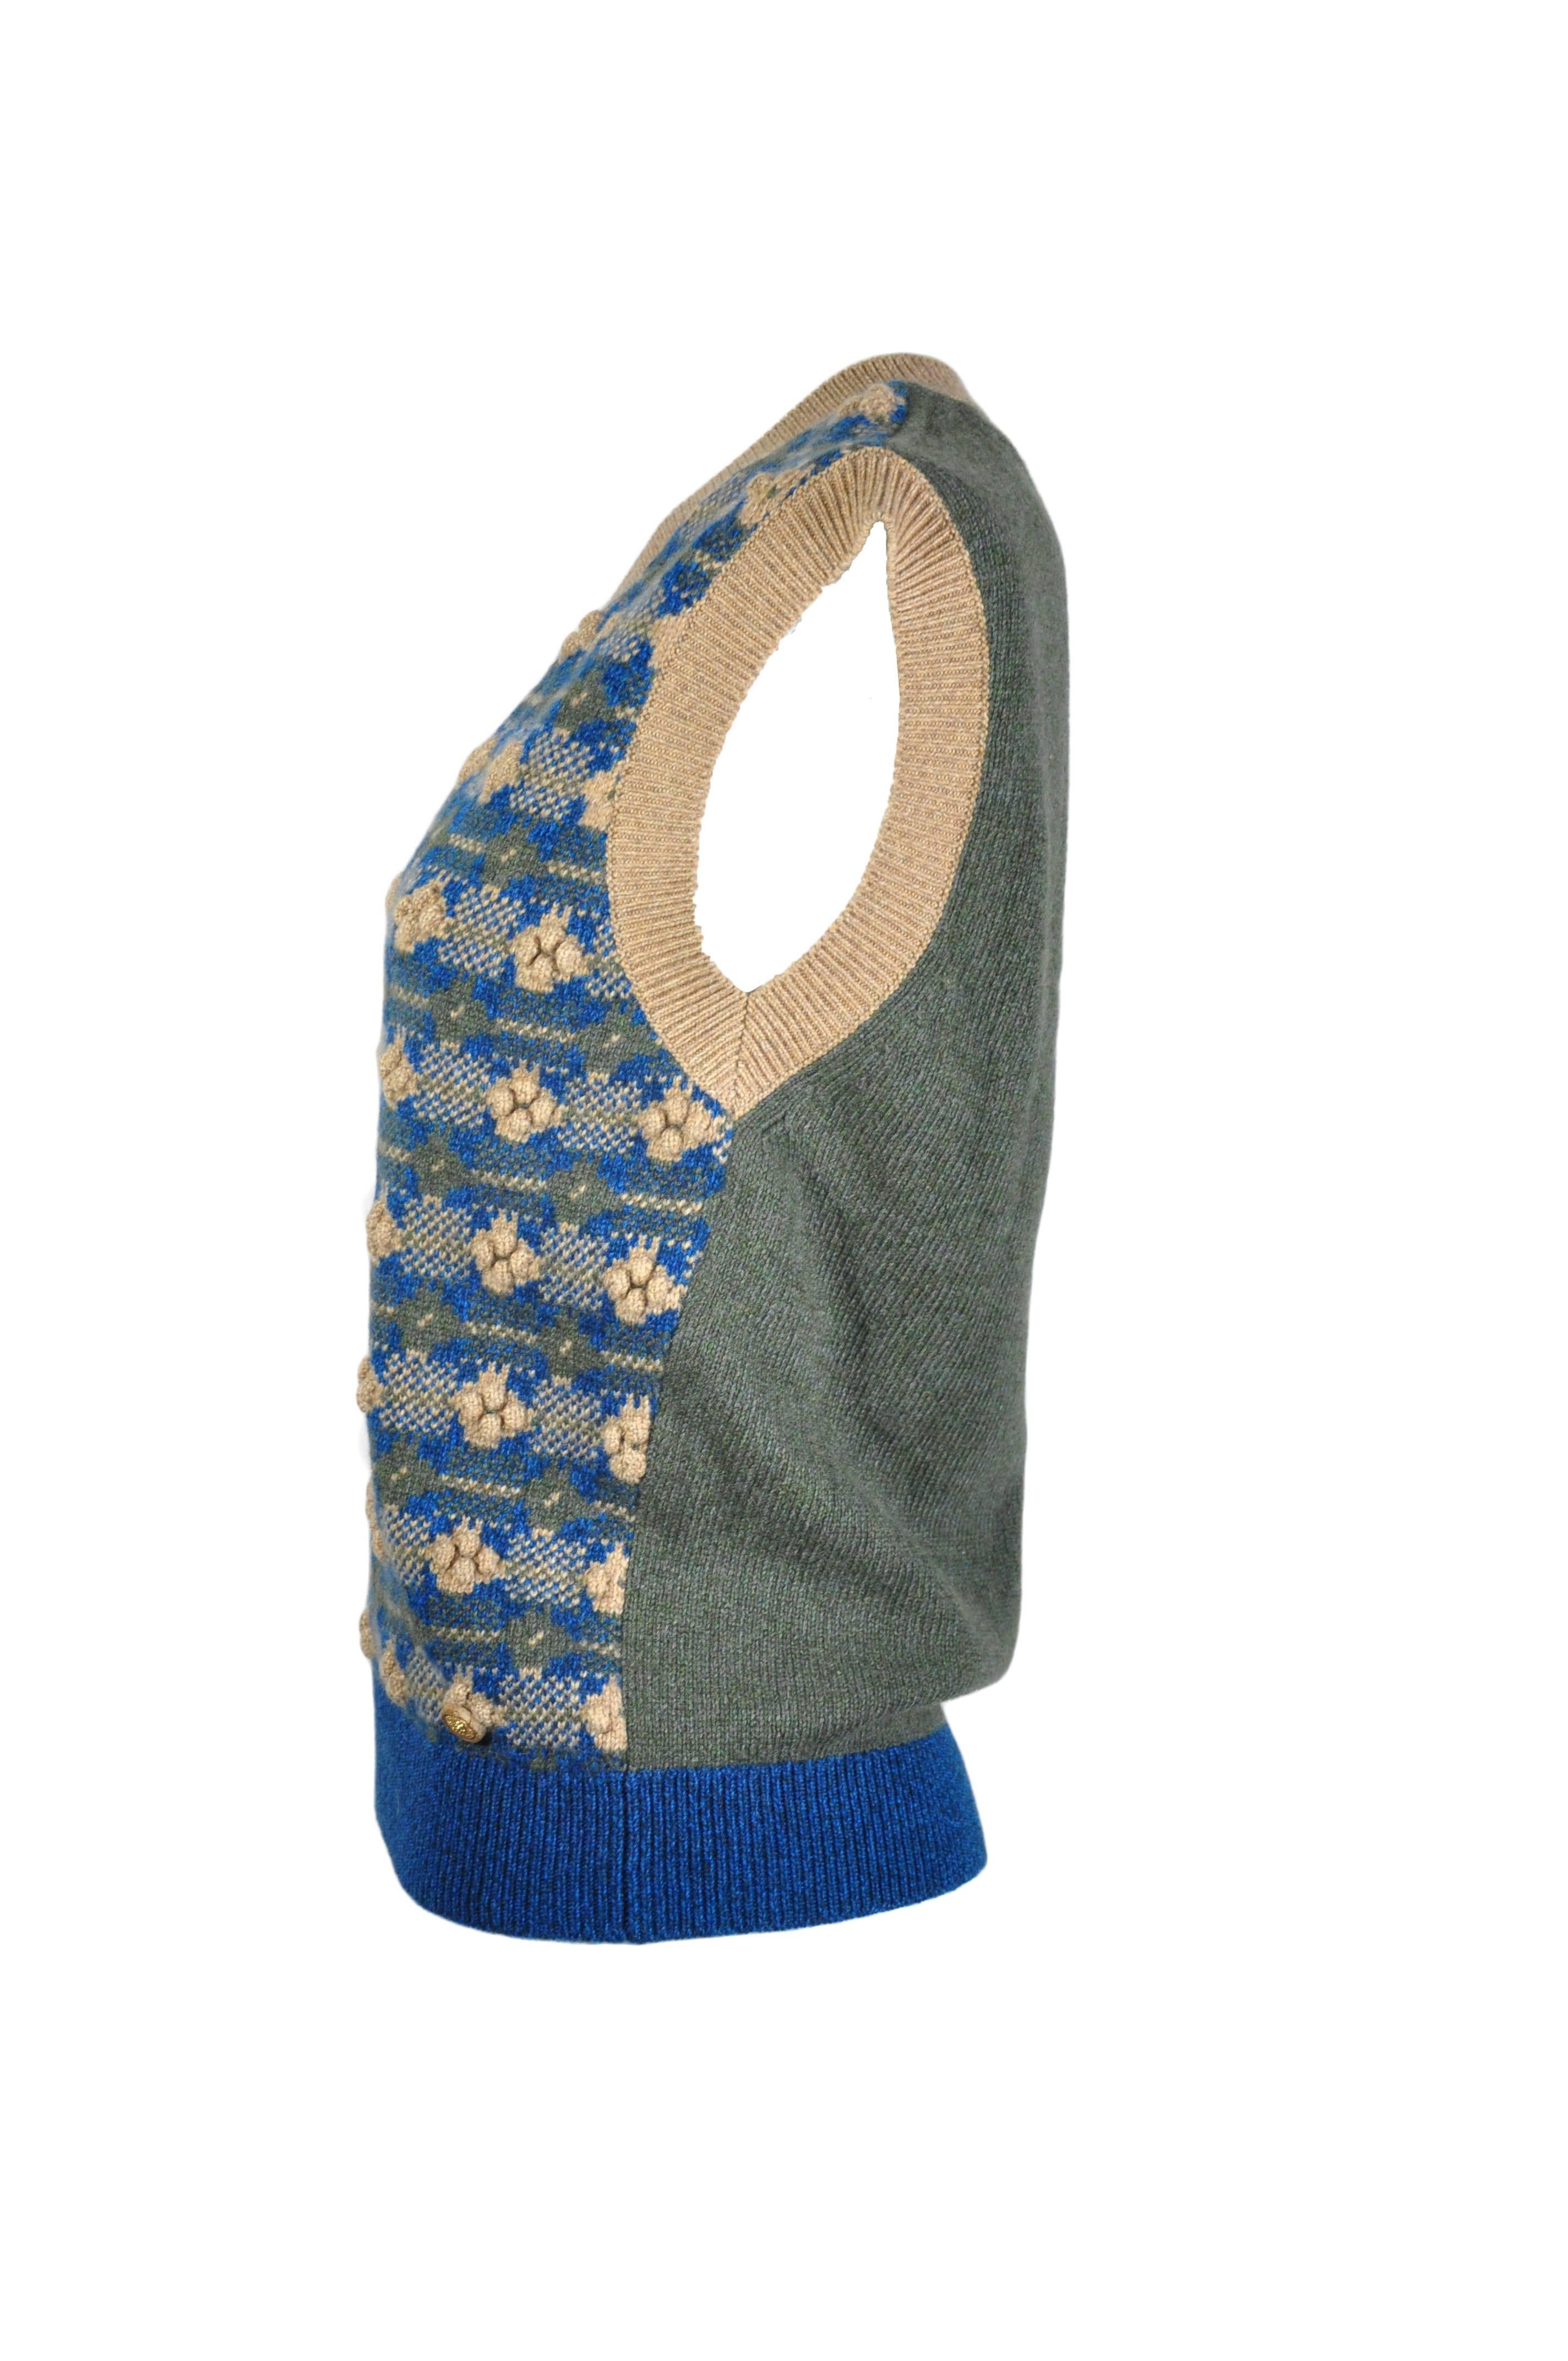 A deep V neck beautiful knitted cashmere sweater vest from Chanel Brasserie runway collection.  